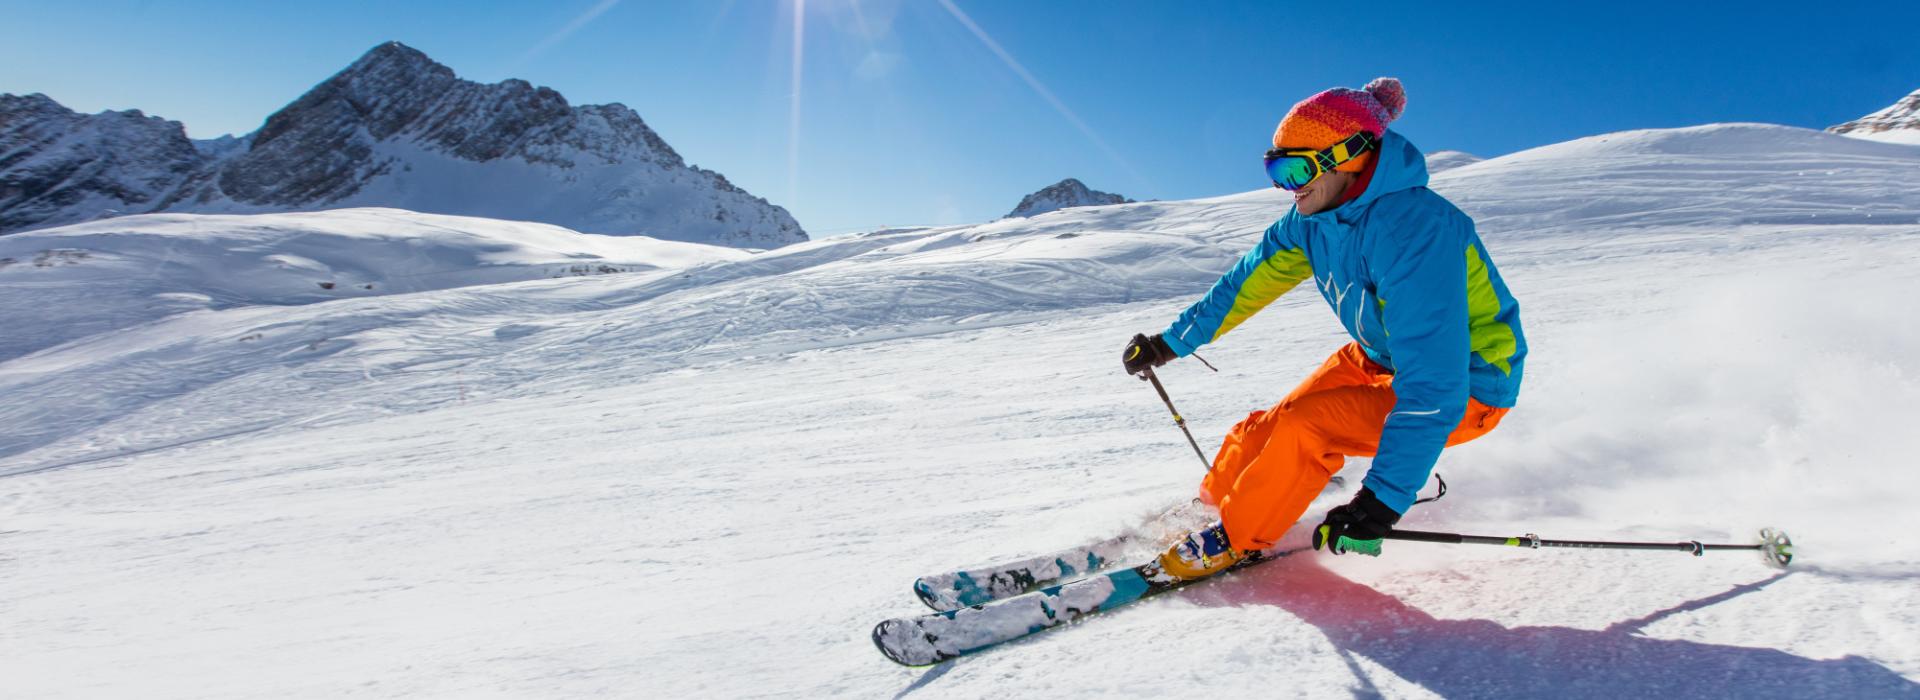 Happy Ski on Monte Rosa - Chalet stay and discount ski pass